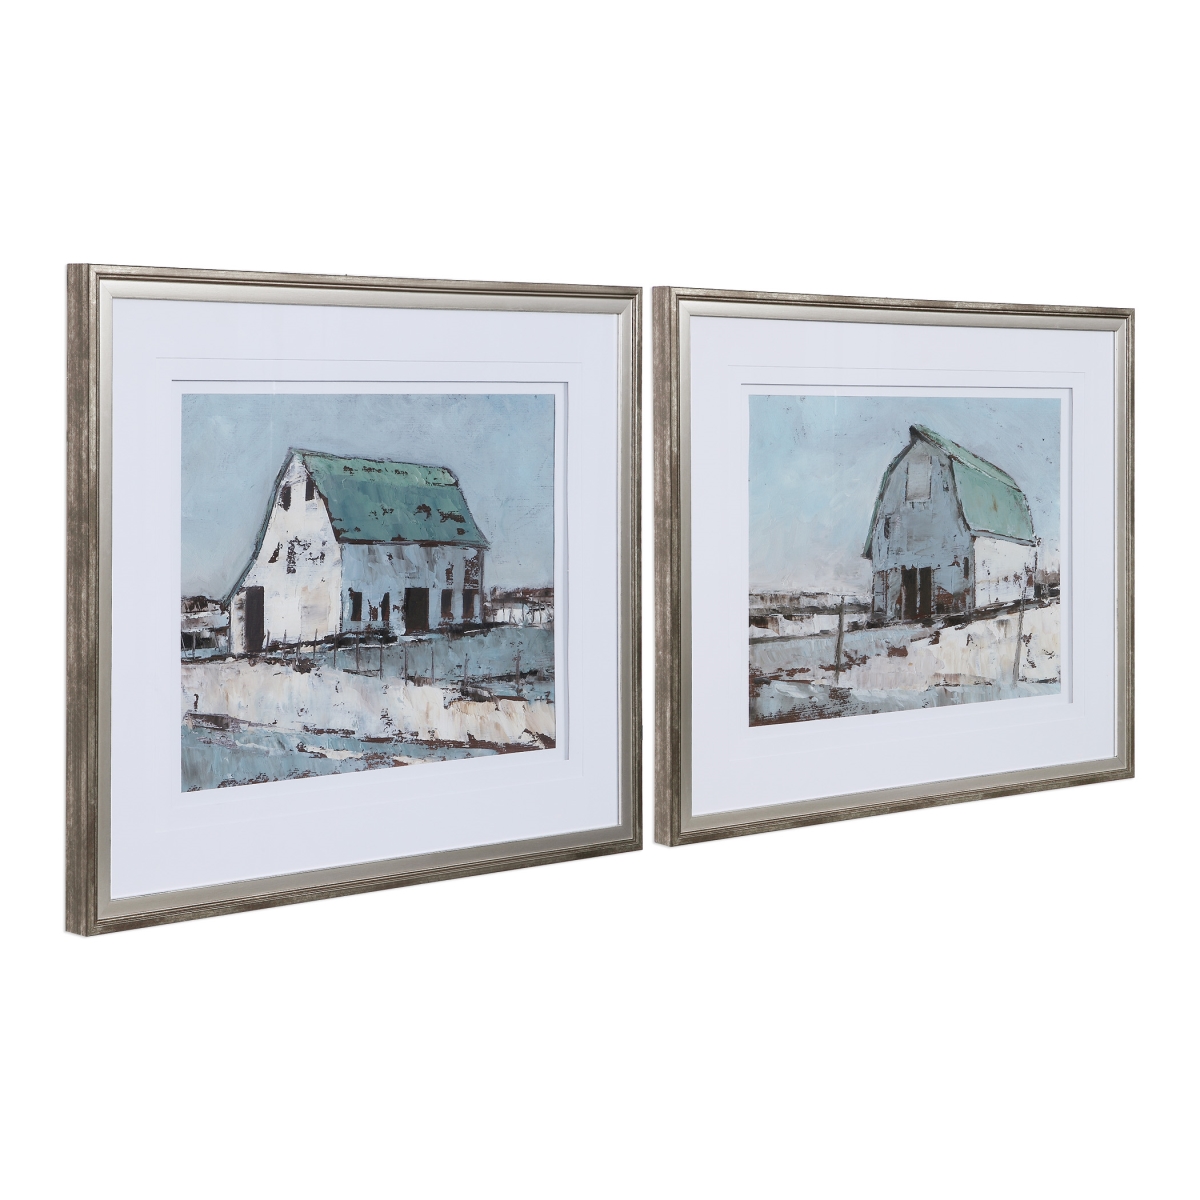 Picture of 212 Main 33689 Plein Air Barns Framed Prints - Set of 2